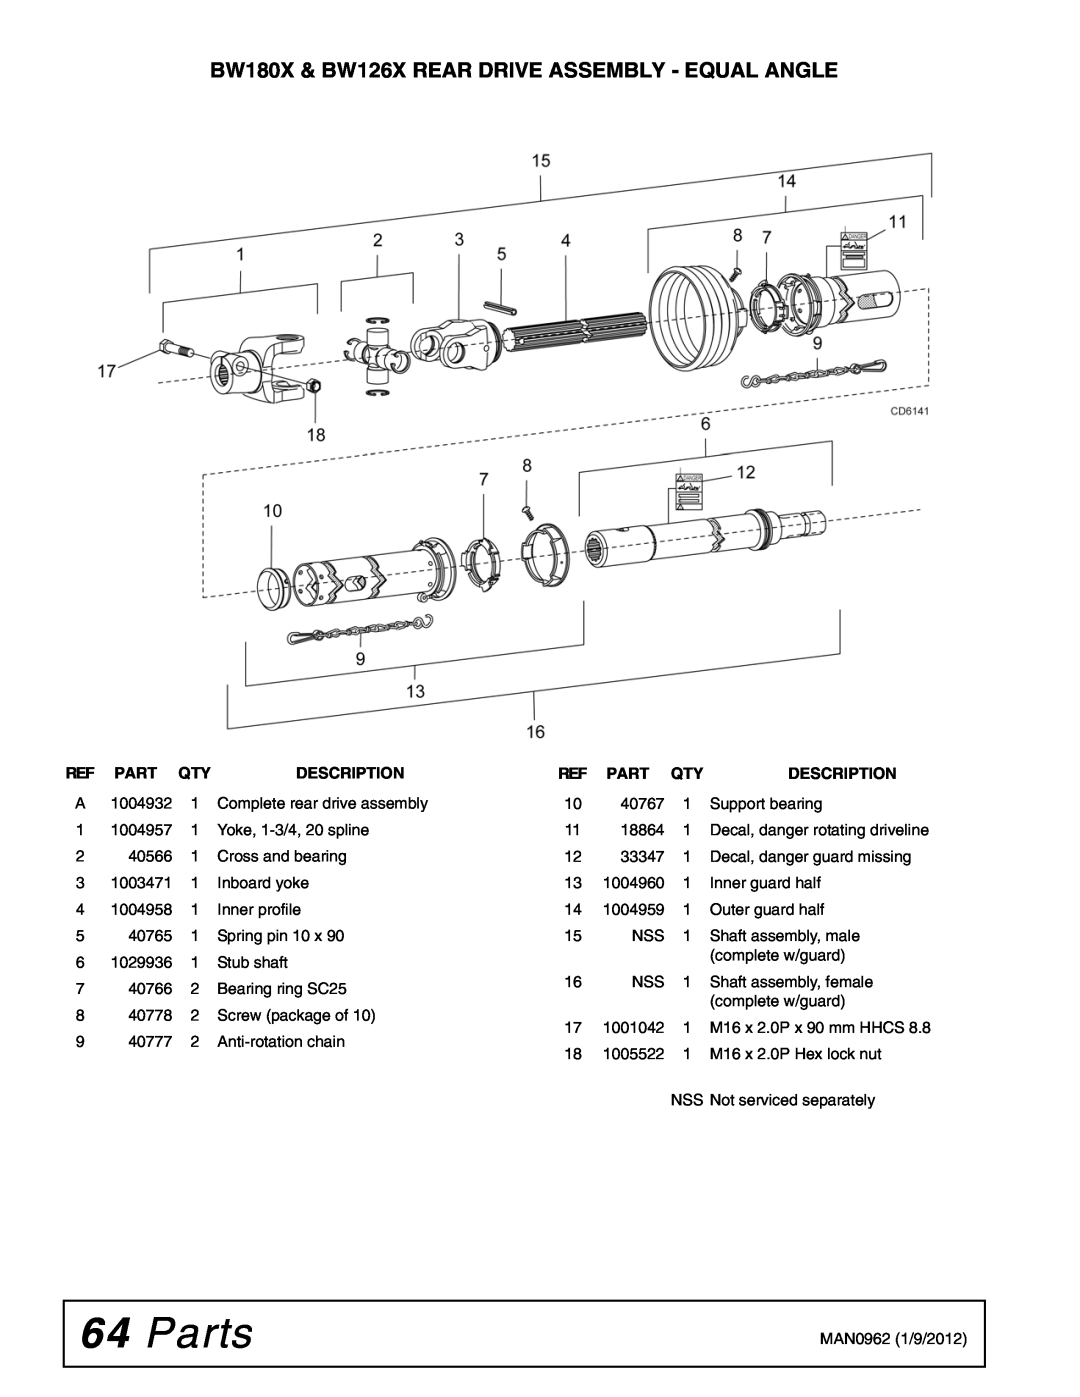 Woods Equipment BW180XQ, BW126XQ manual Parts, BW180X & BW126X REAR DRIVE ASSEMBLY - EQUAL ANGLE, Description 